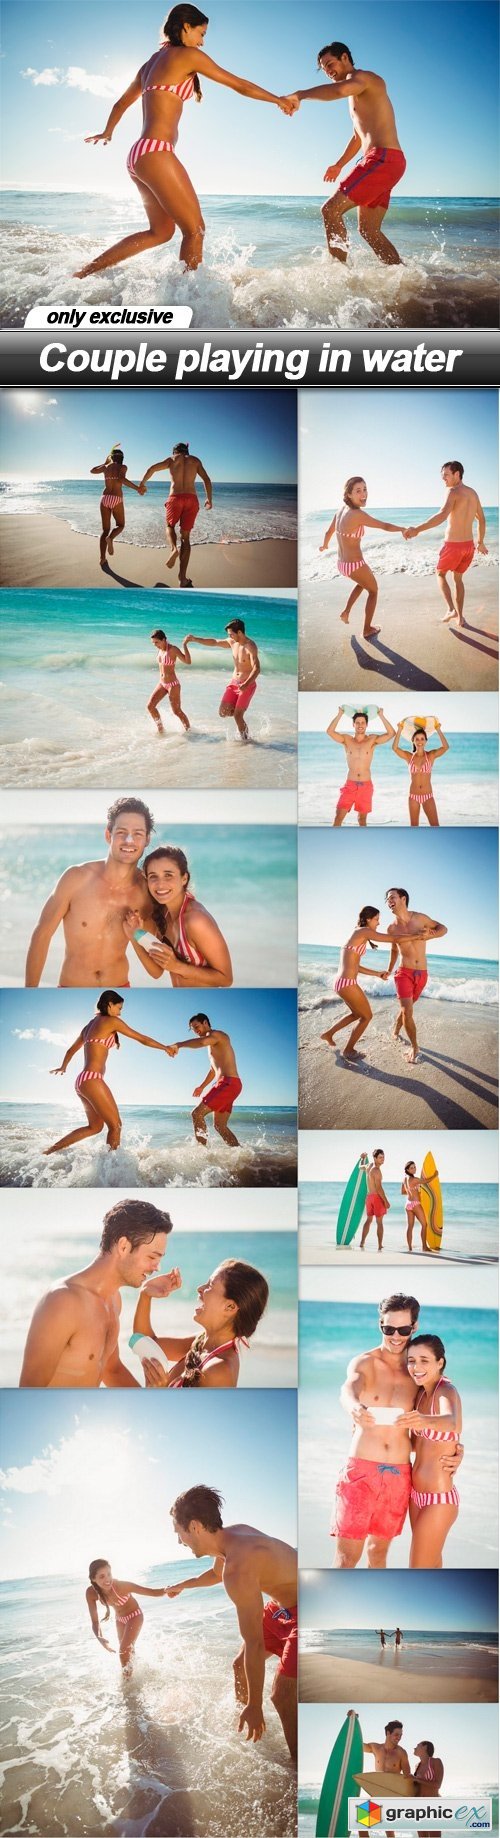 Couple playing in water - 13 UHQ JPEG